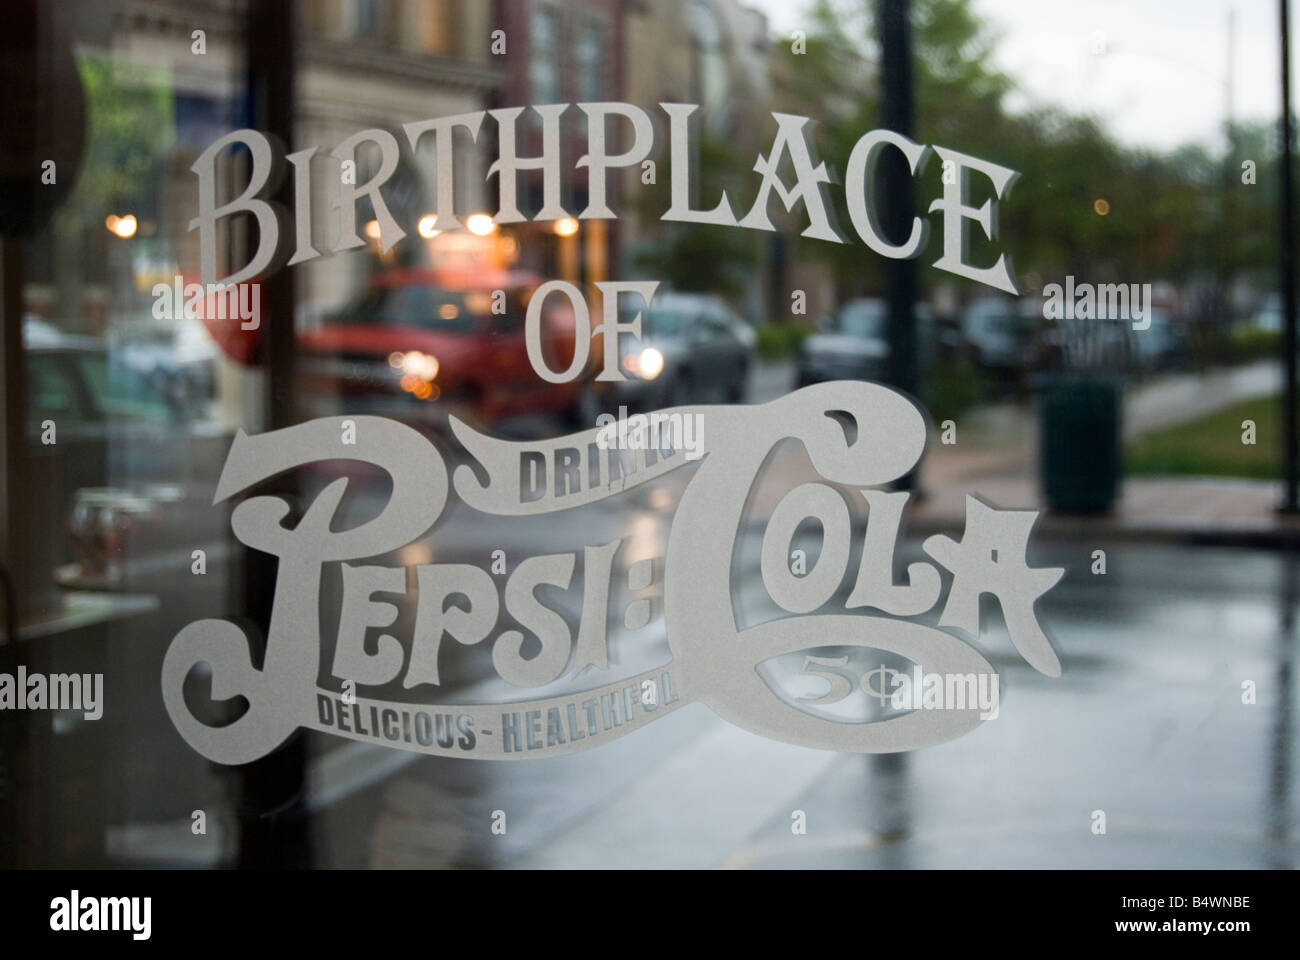 https://c8.alamy.com/comp/B4WNBE/window-to-the-store-of-the-birthplace-of-pepsi-in-new-bern-B4WNBE.jpg